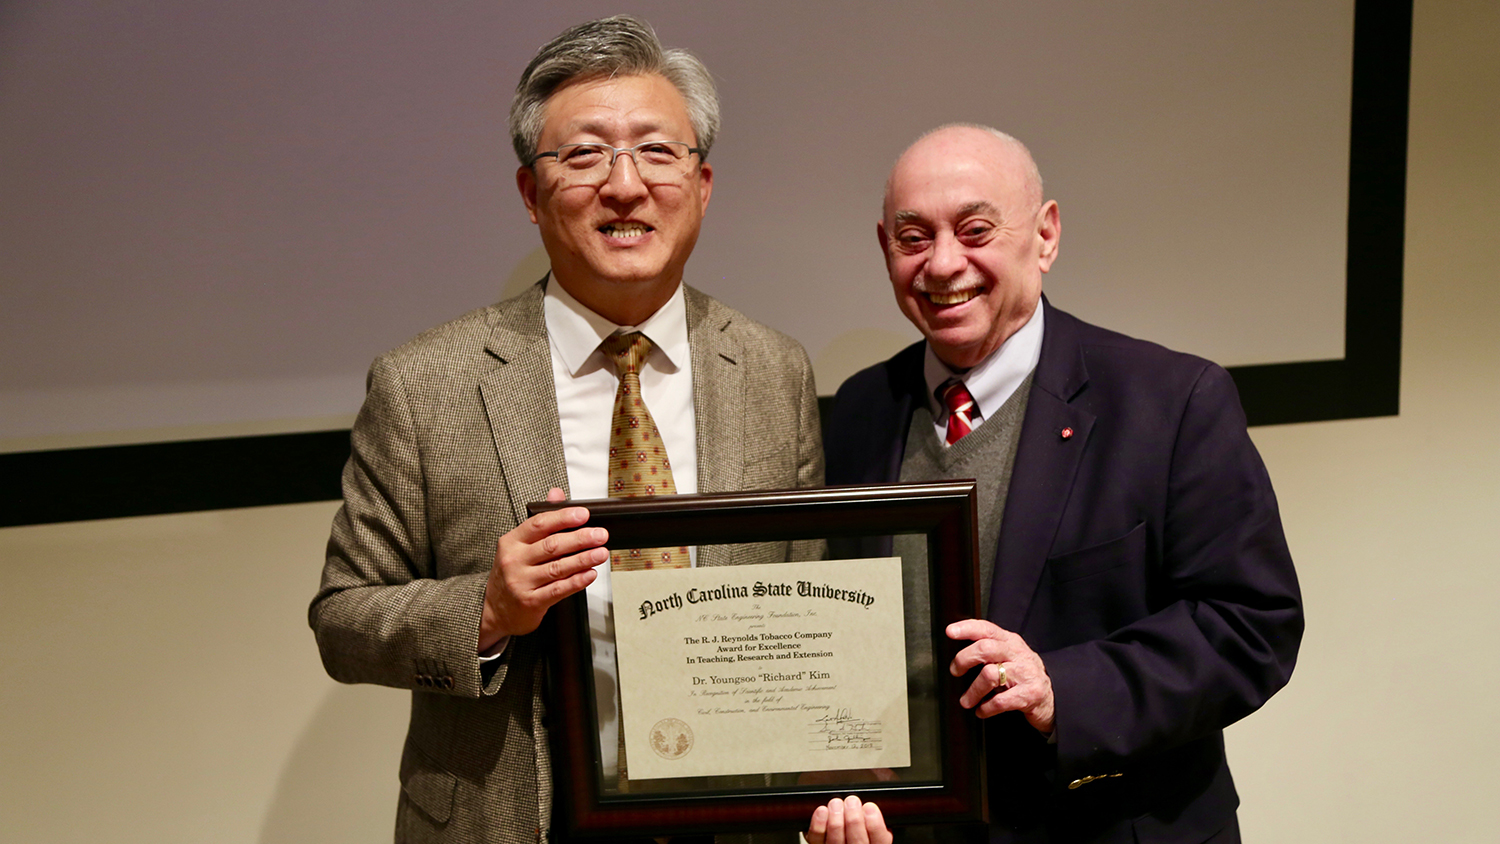 Dr. Youngsoo “Richard” Kim and Dr. Louis Martin-Vega, dean of the College